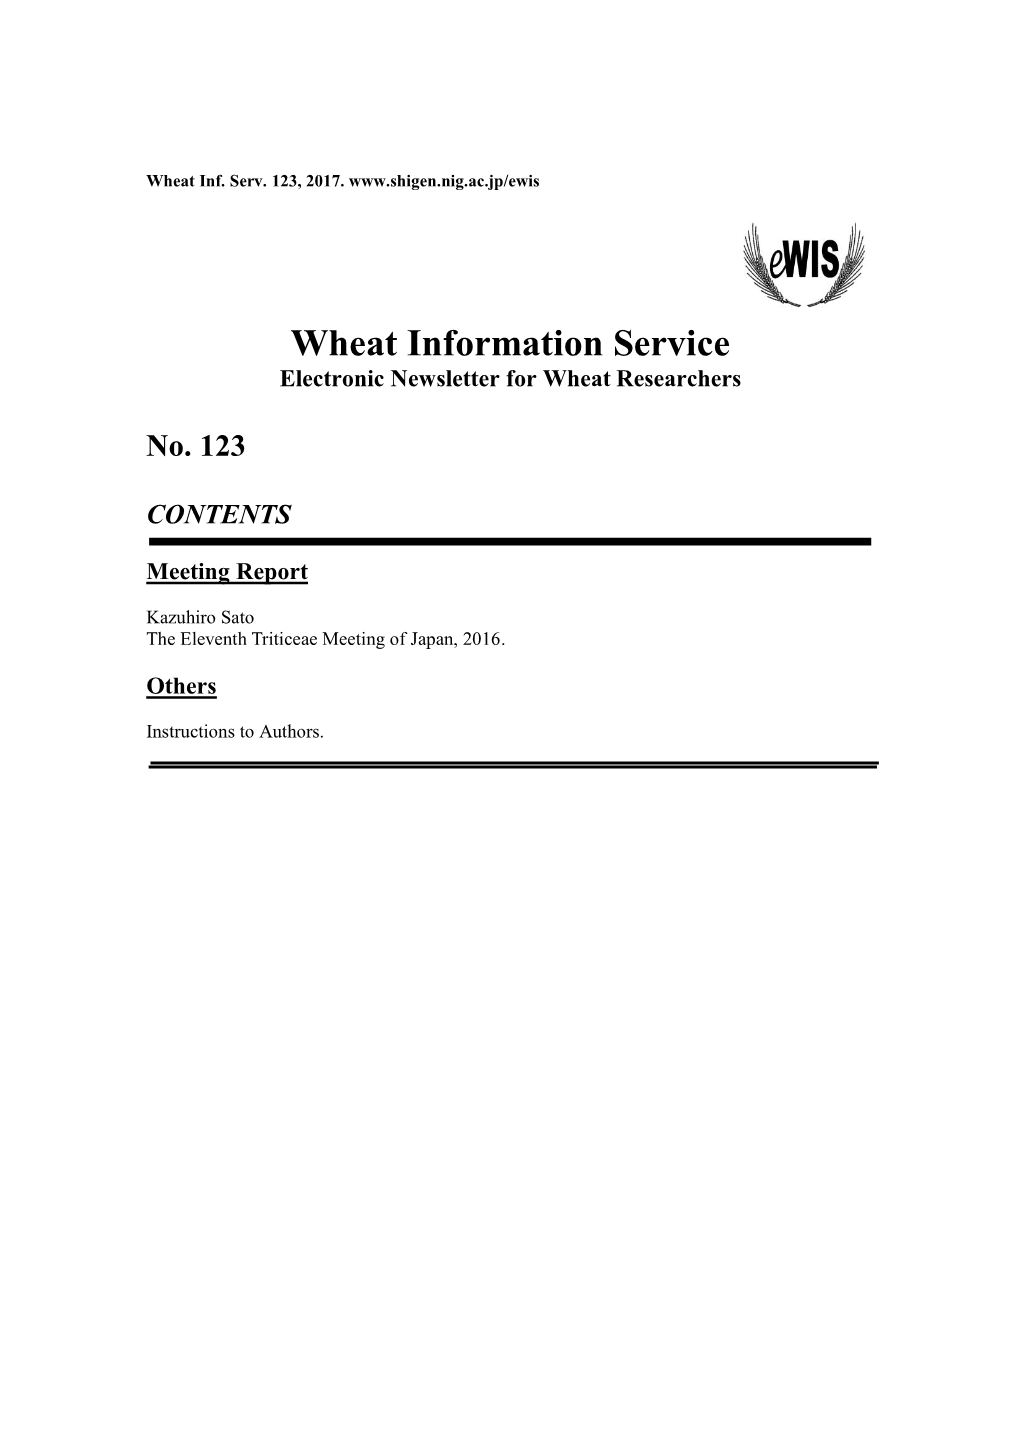 Wheat Information Service Electronic Newsletter for Wheat Researchers